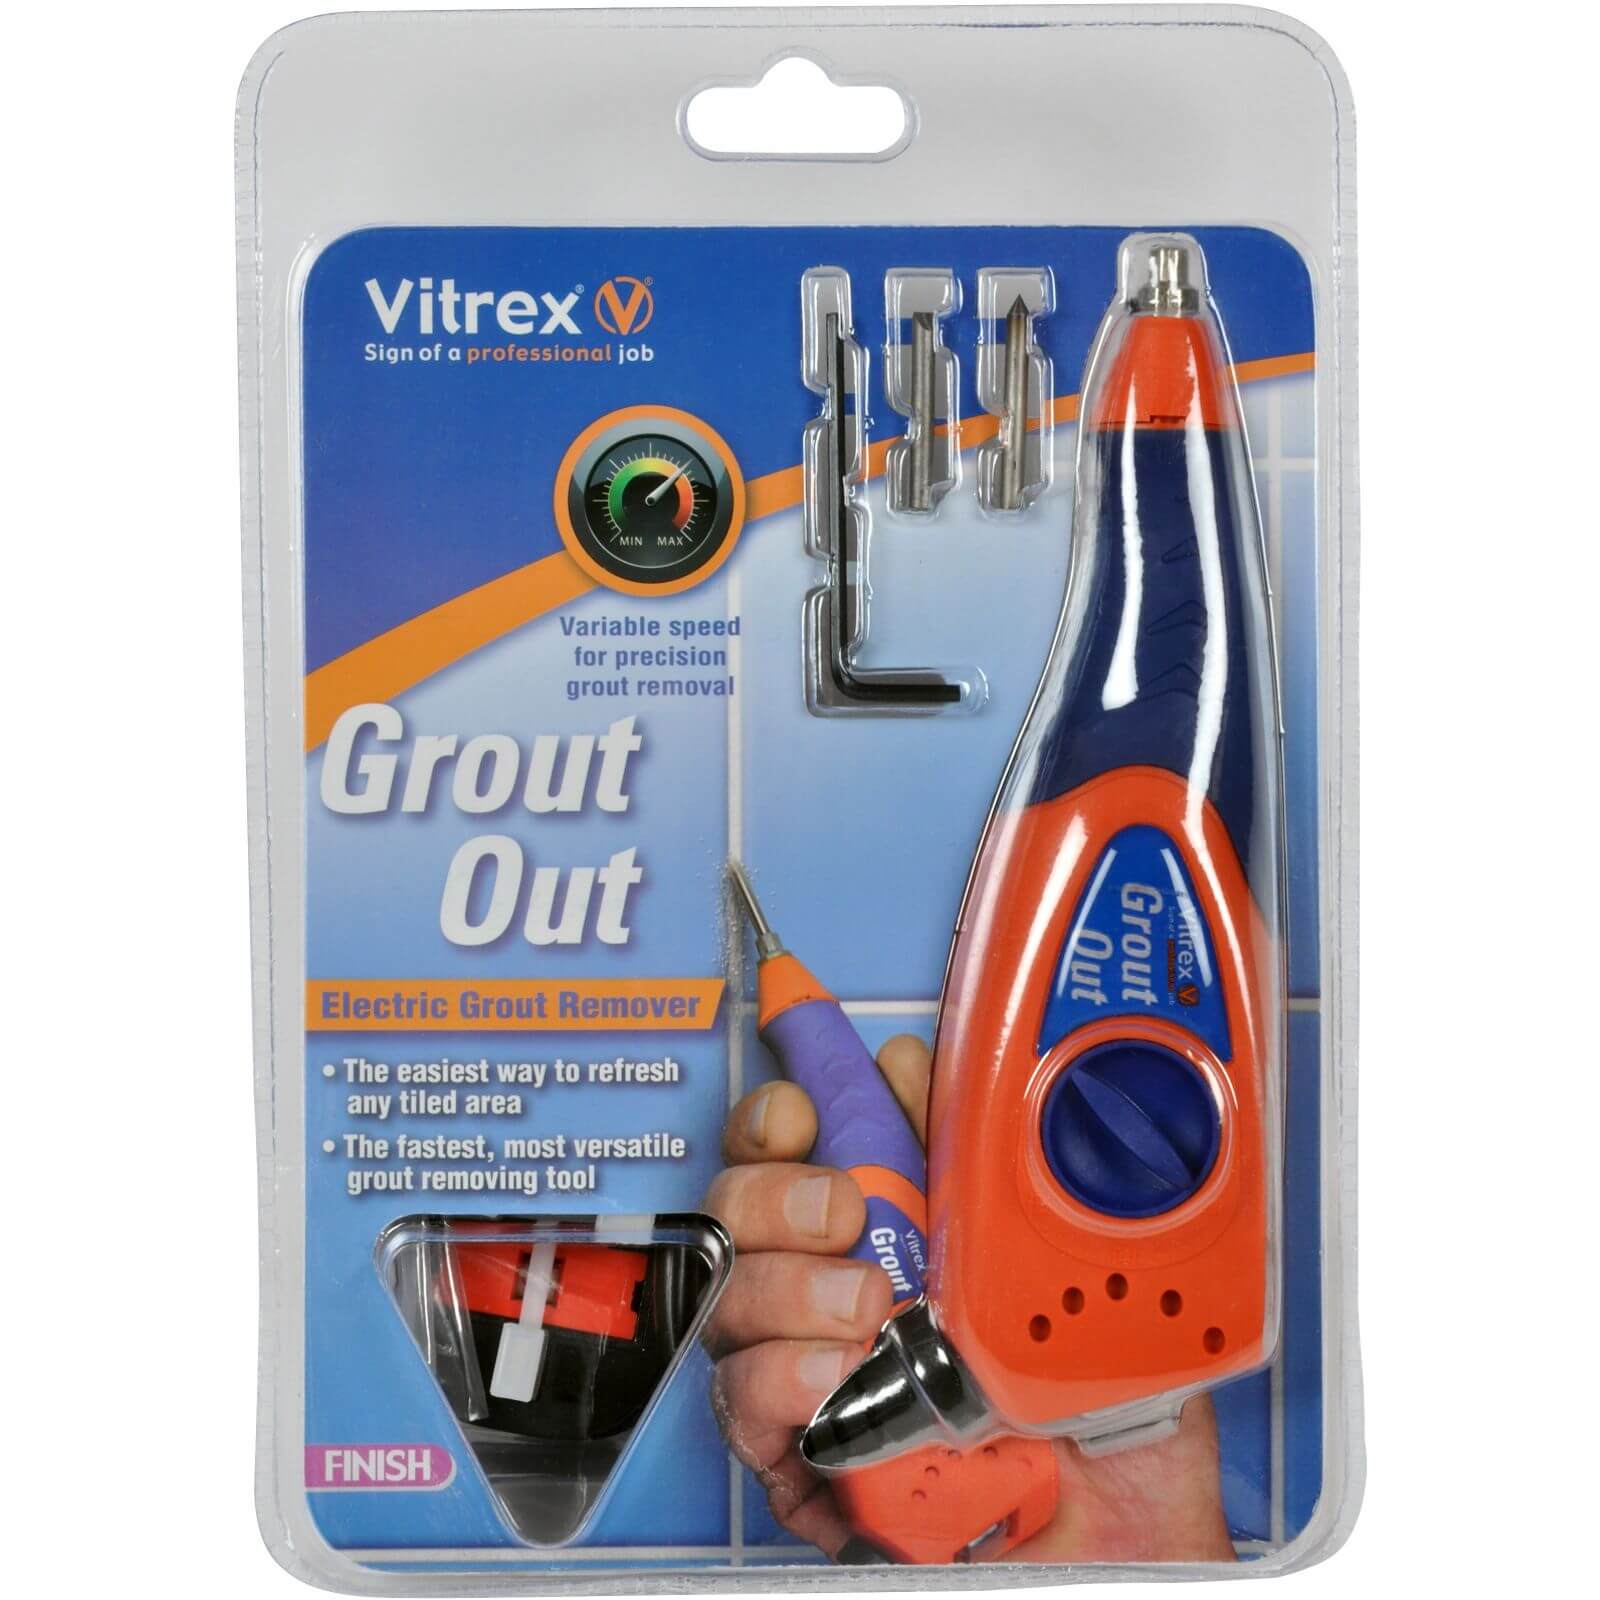 Grout Out